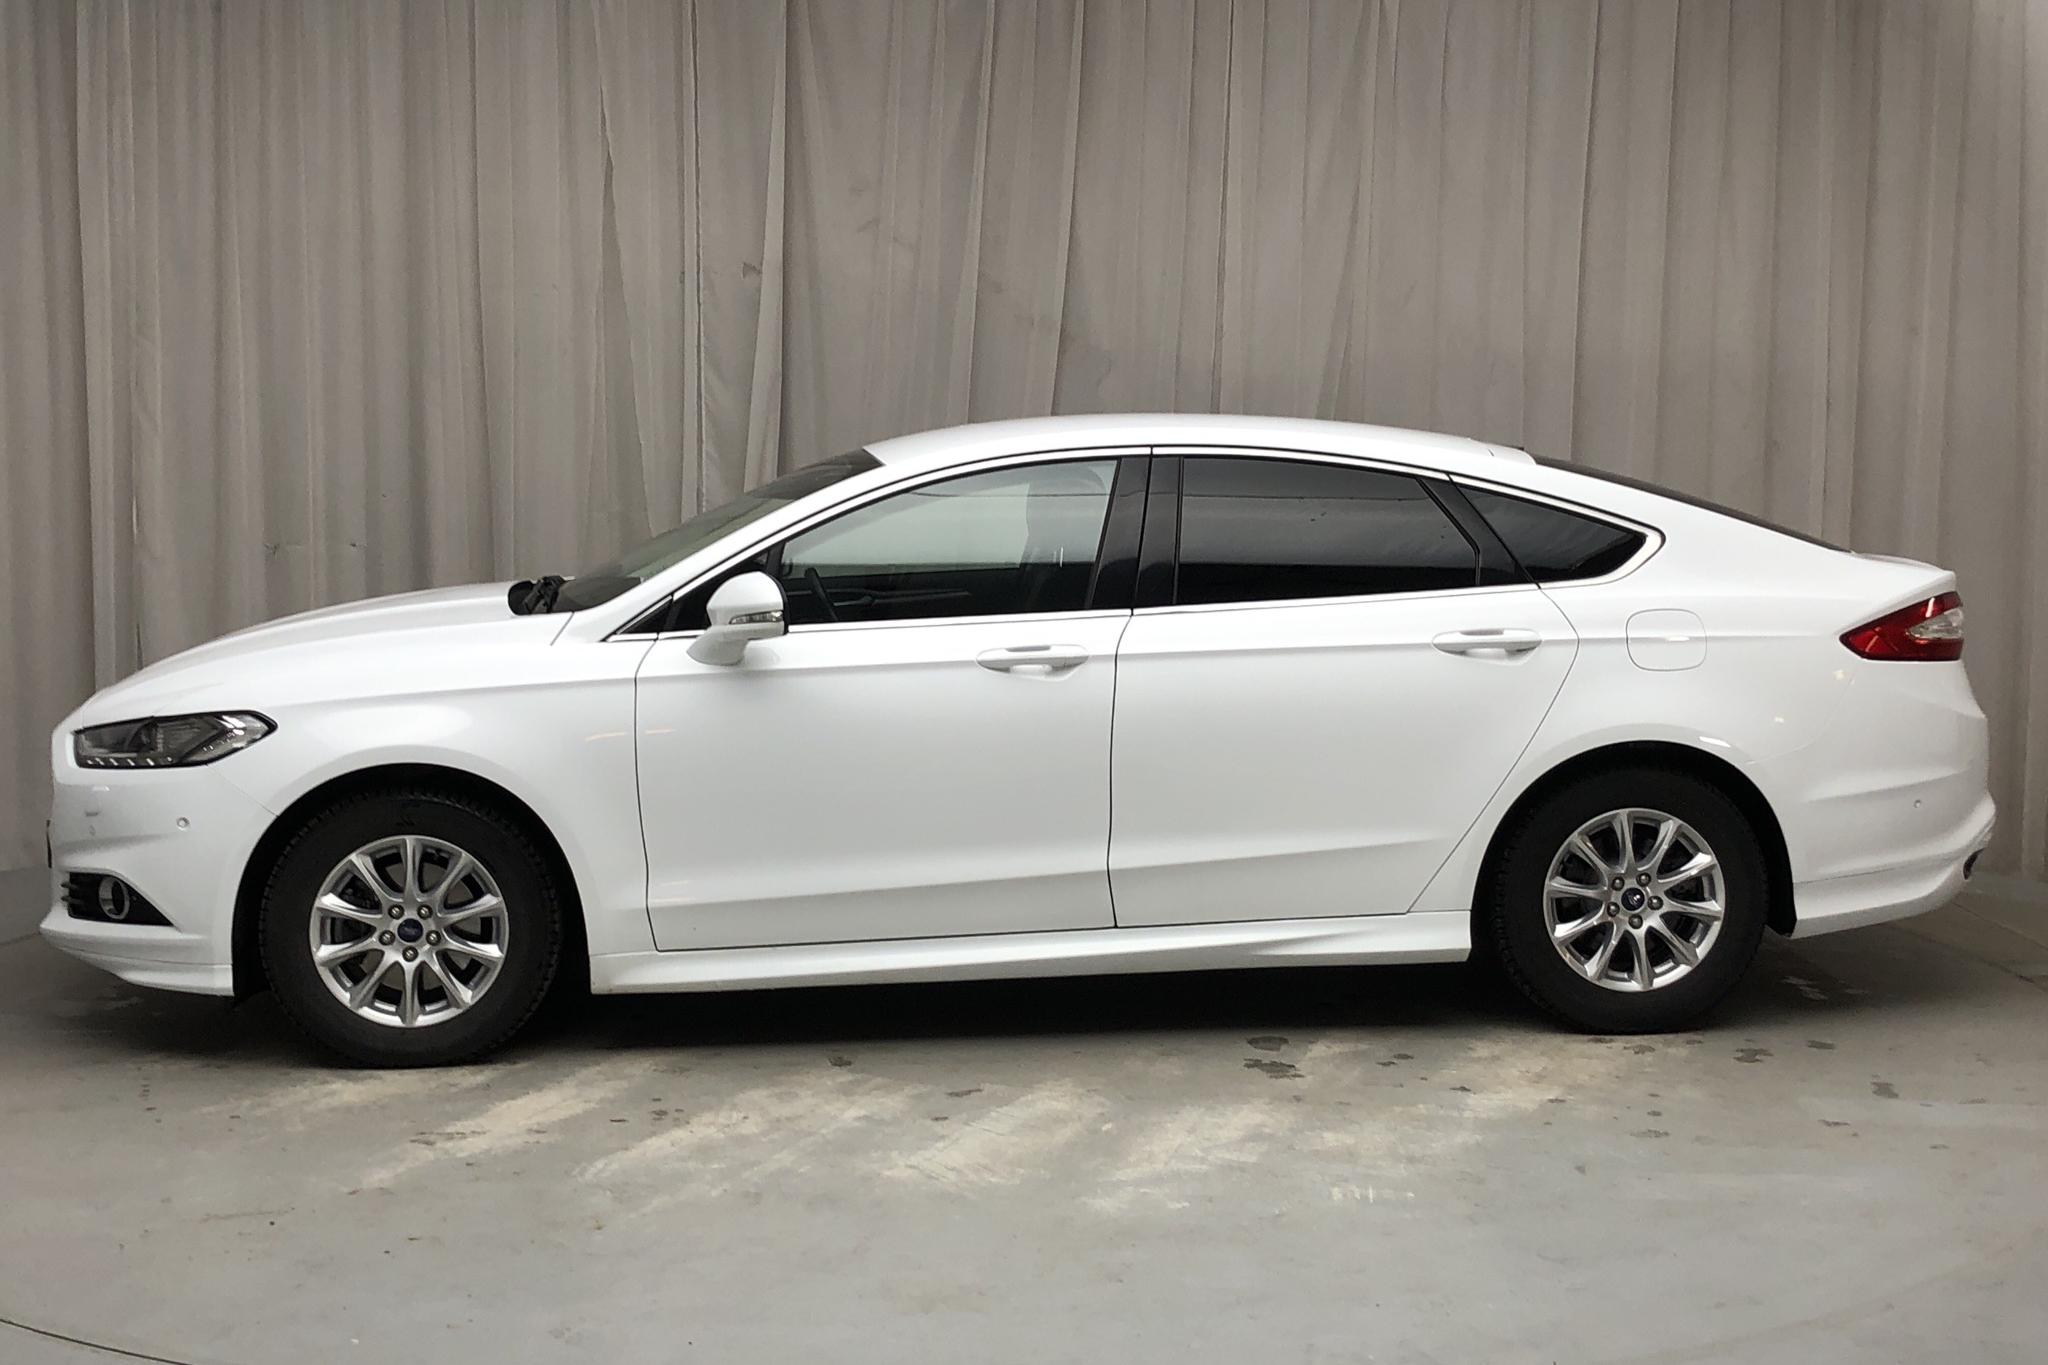 Ford Mondeo 2.0 TDCi 5dr (150hk) - 46 600 km - Automatic - white - 2017